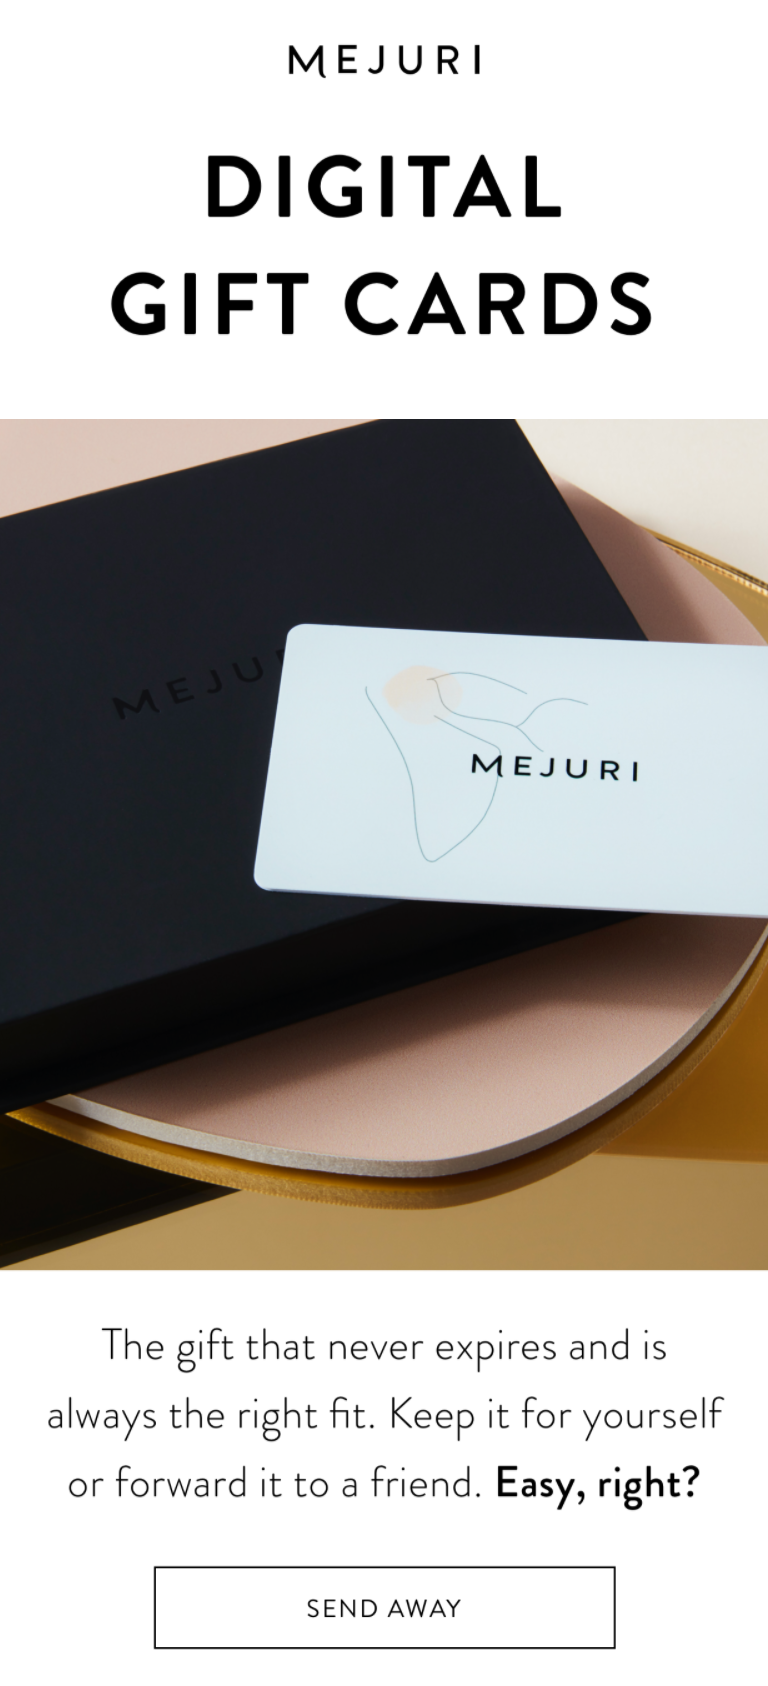 mejuri holiday campaign example